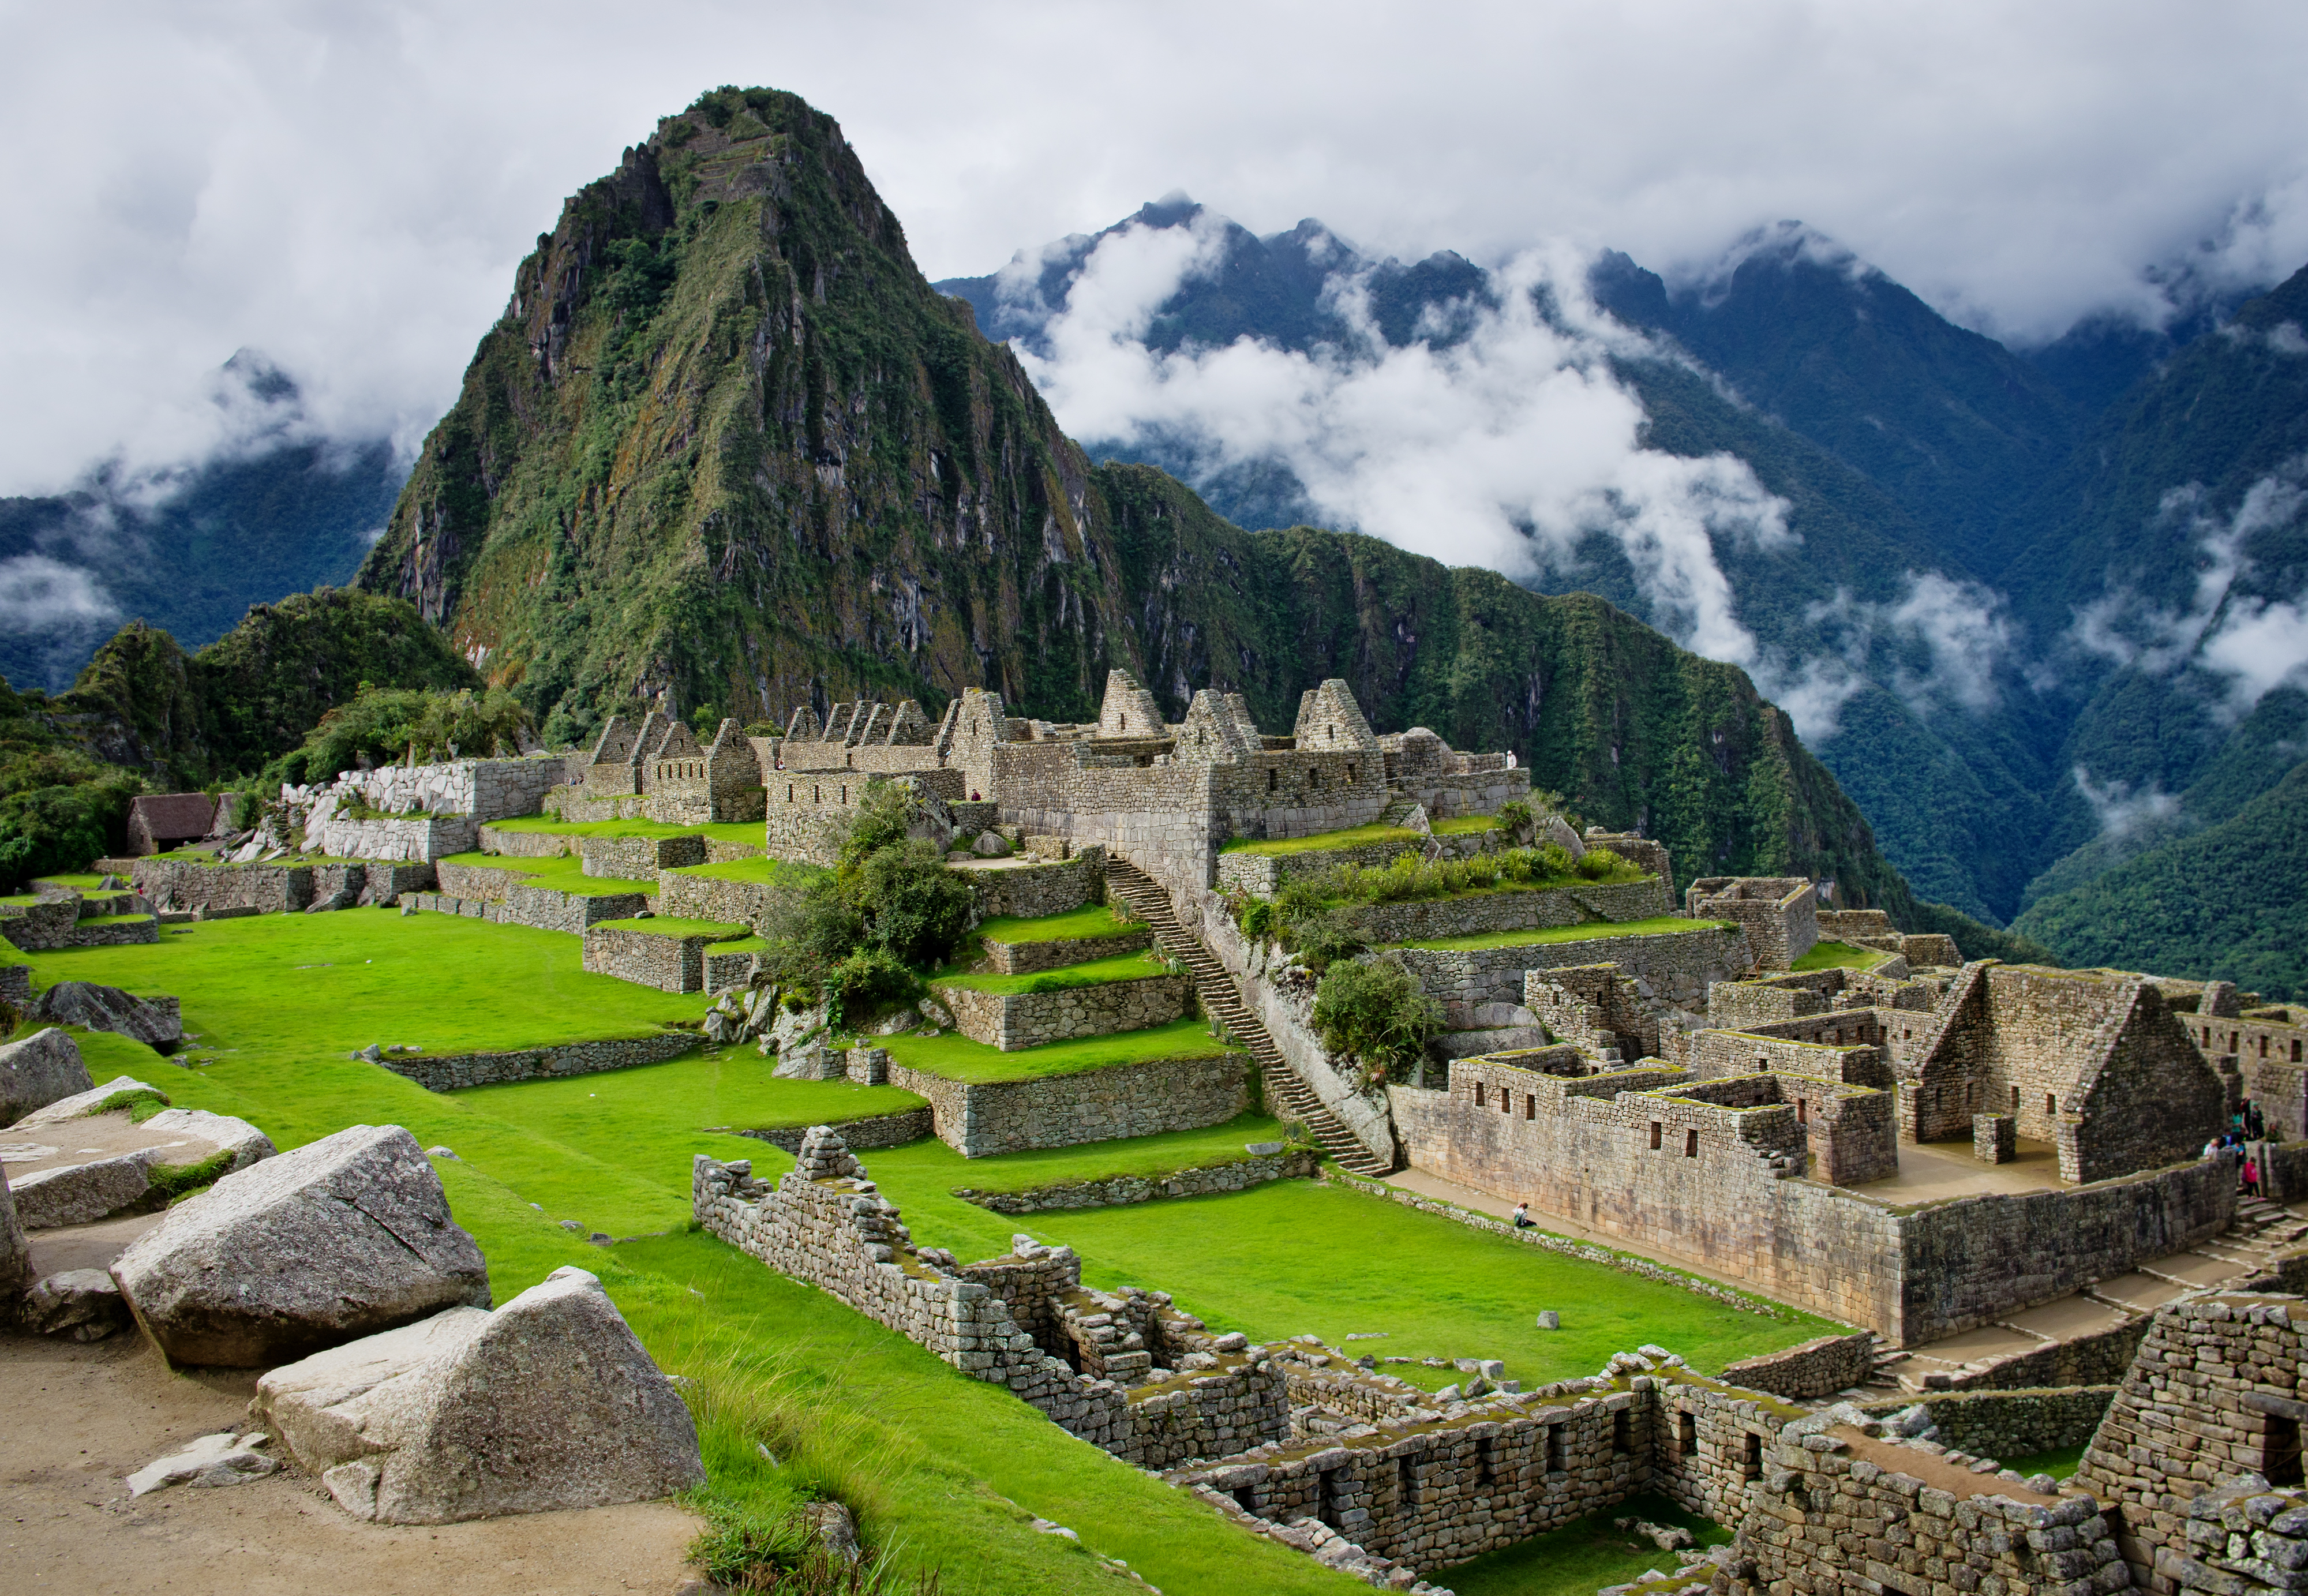 Discover the Best of Peru in 7 Days During an Amazing Family Vacation - Machu Picchu in Peru - A UNESCO World Heritage Site